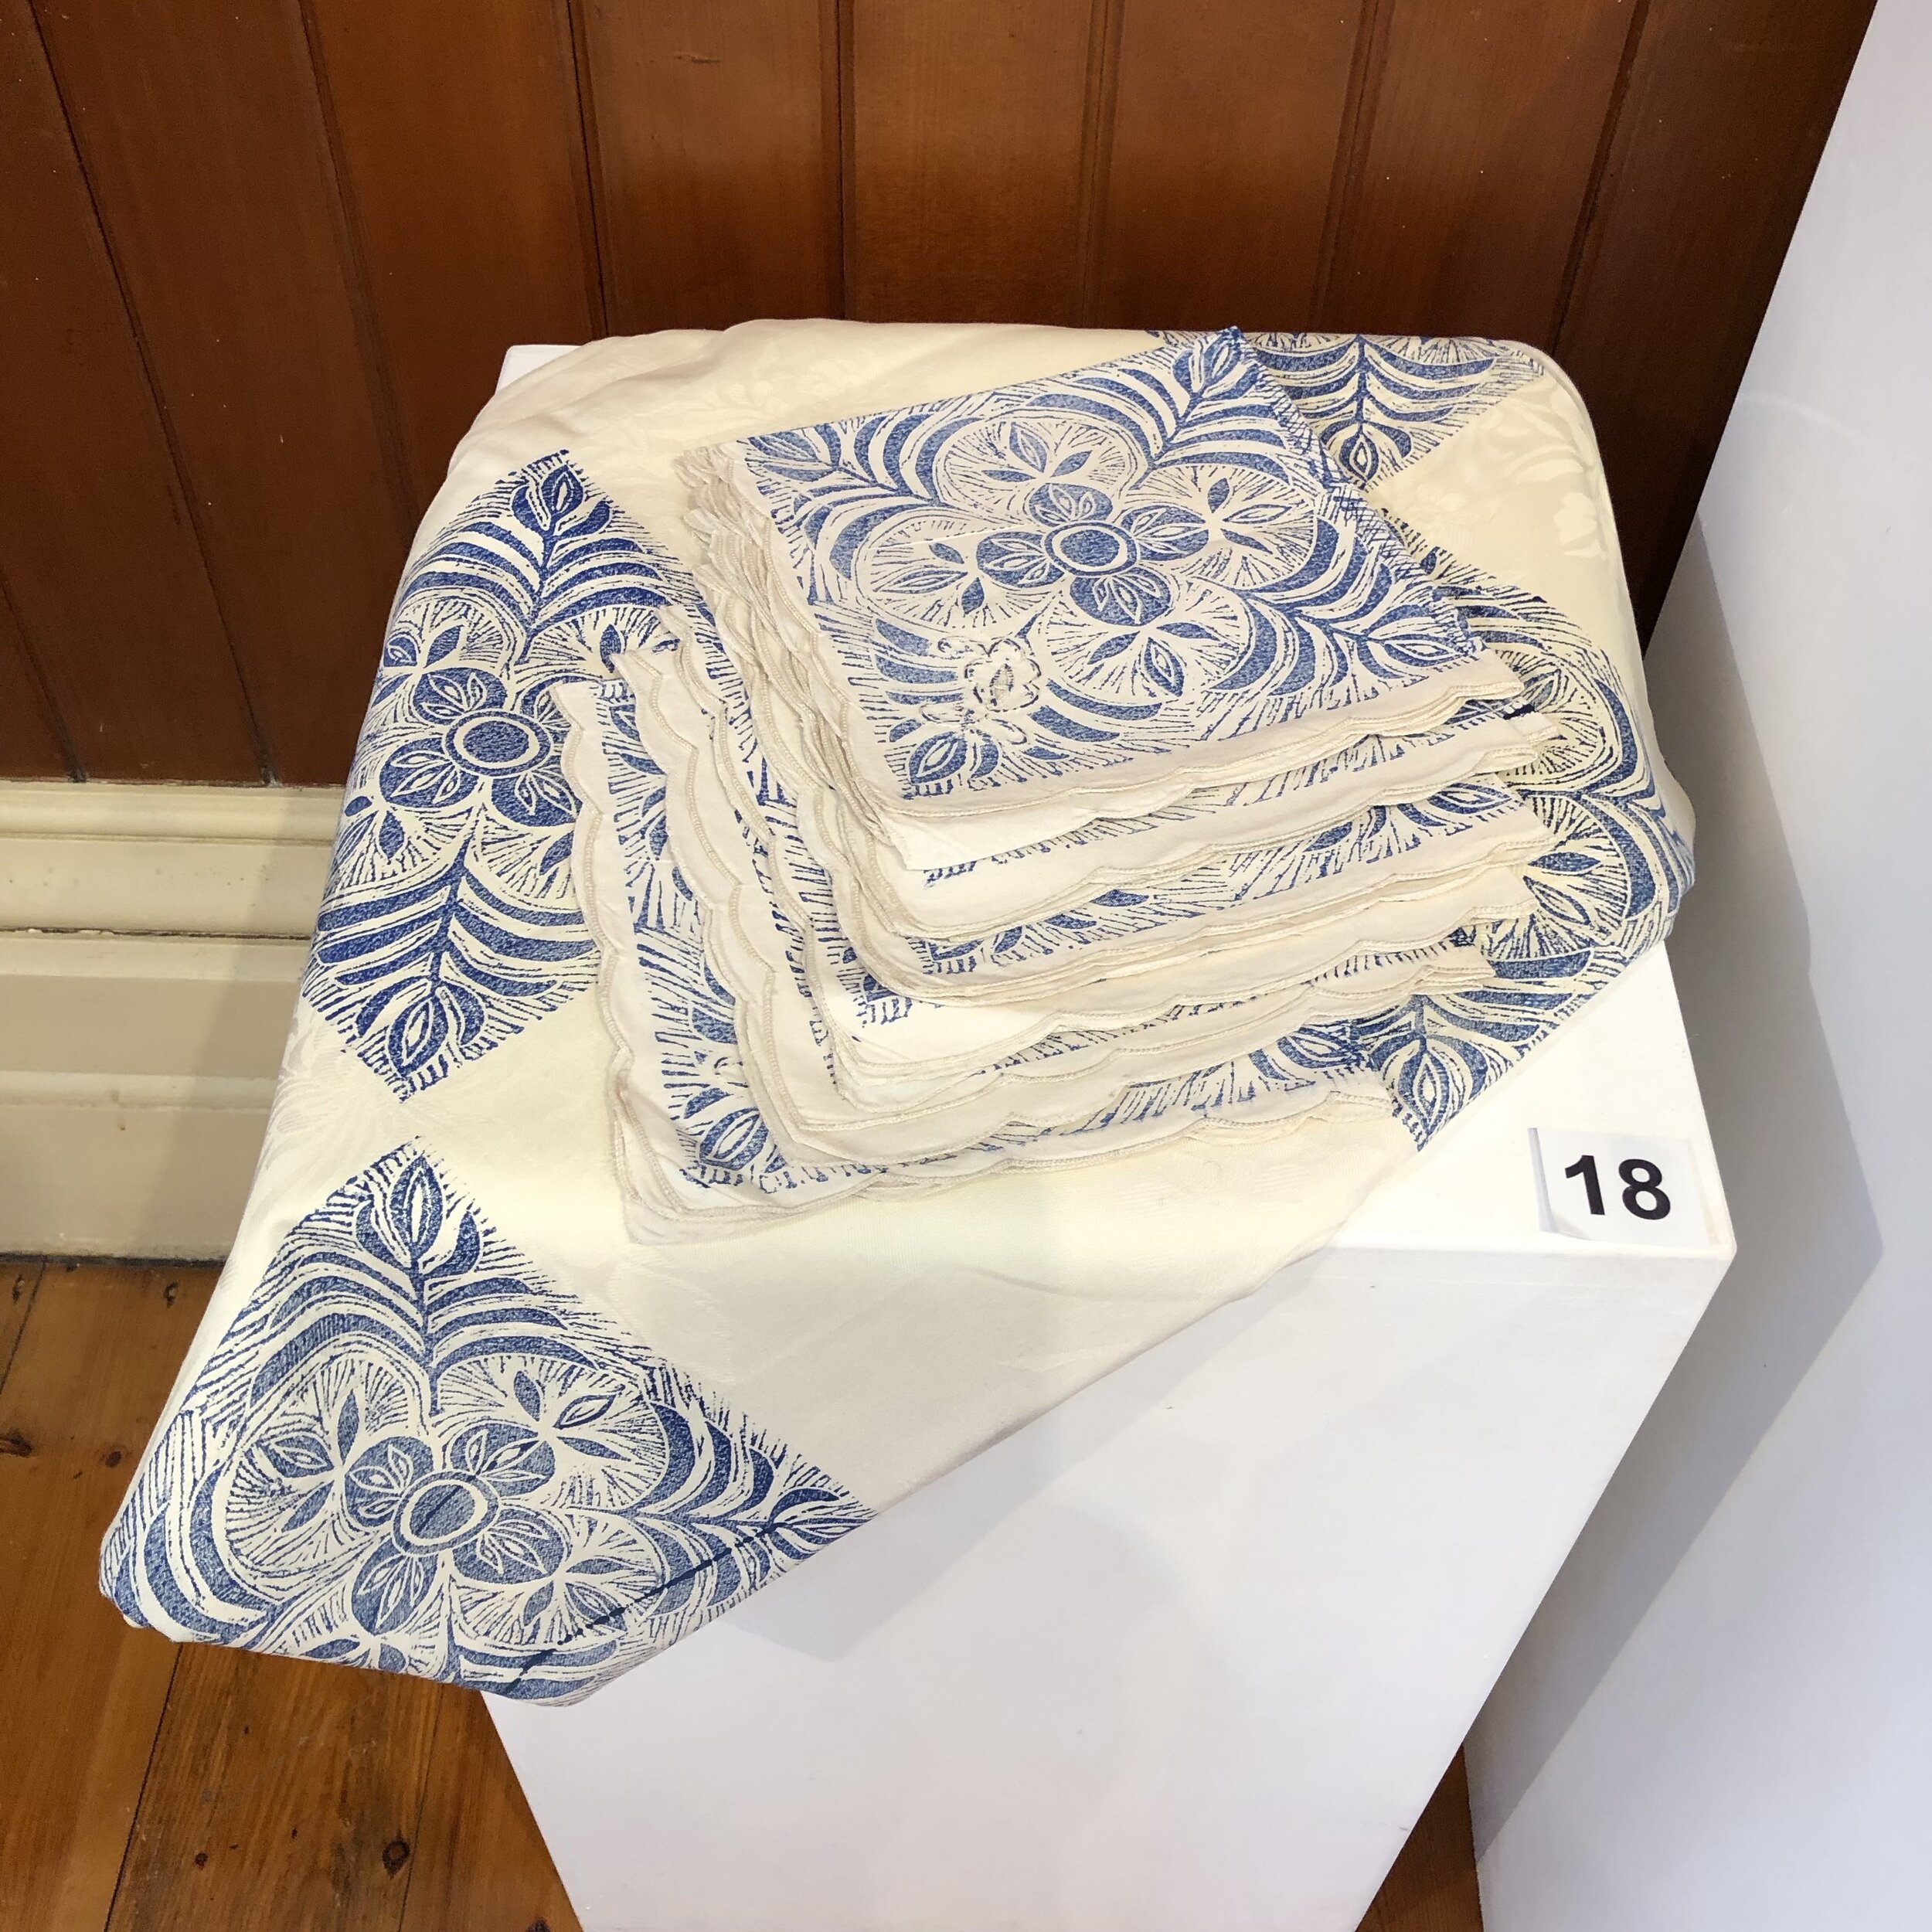 "Tablecloth with 8 Napkins" by Rosie Lyons